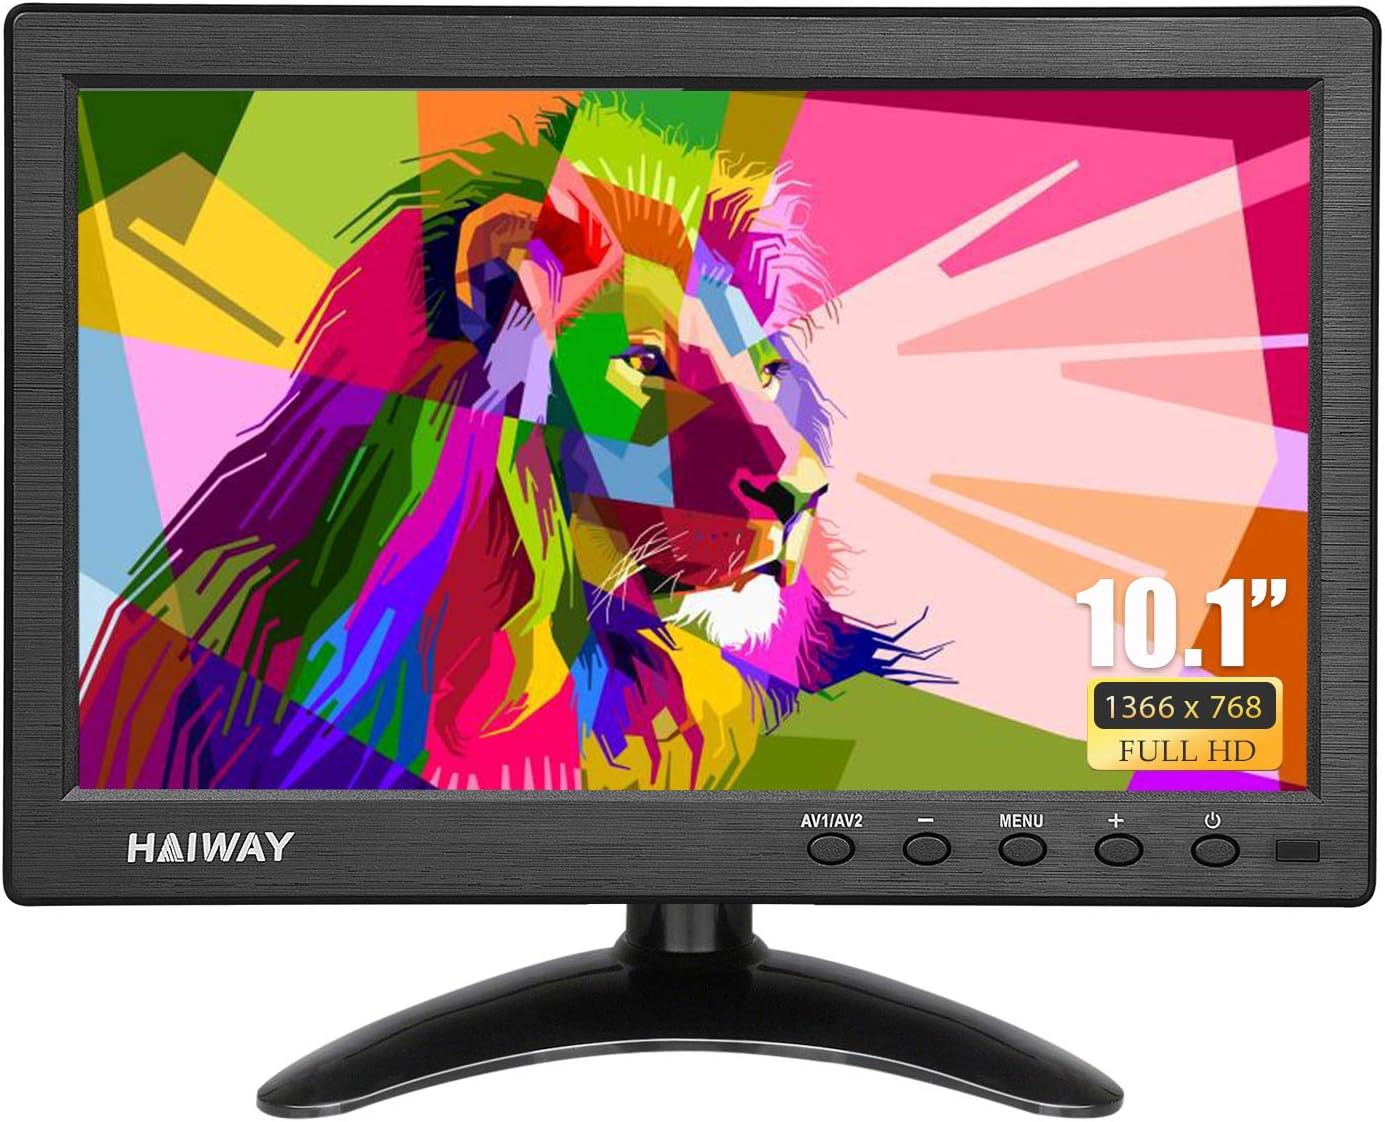 Haiway 10.1 inch Security Monitor, 1366x768 Resolution Small HDMI Monitor - $75